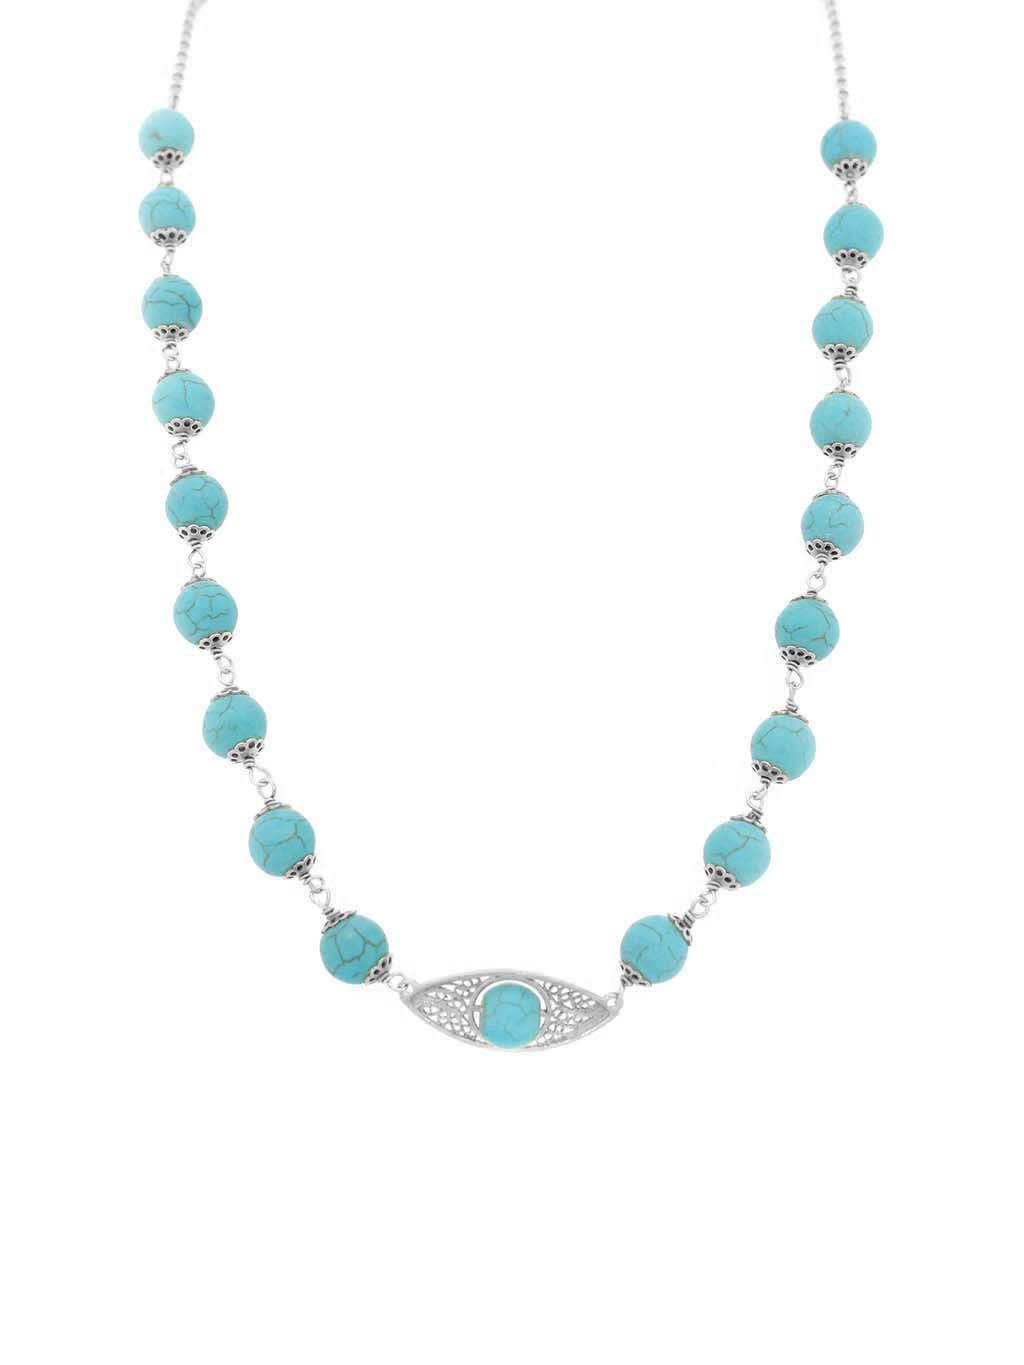 Stunning Necklace with Turquoise Stone